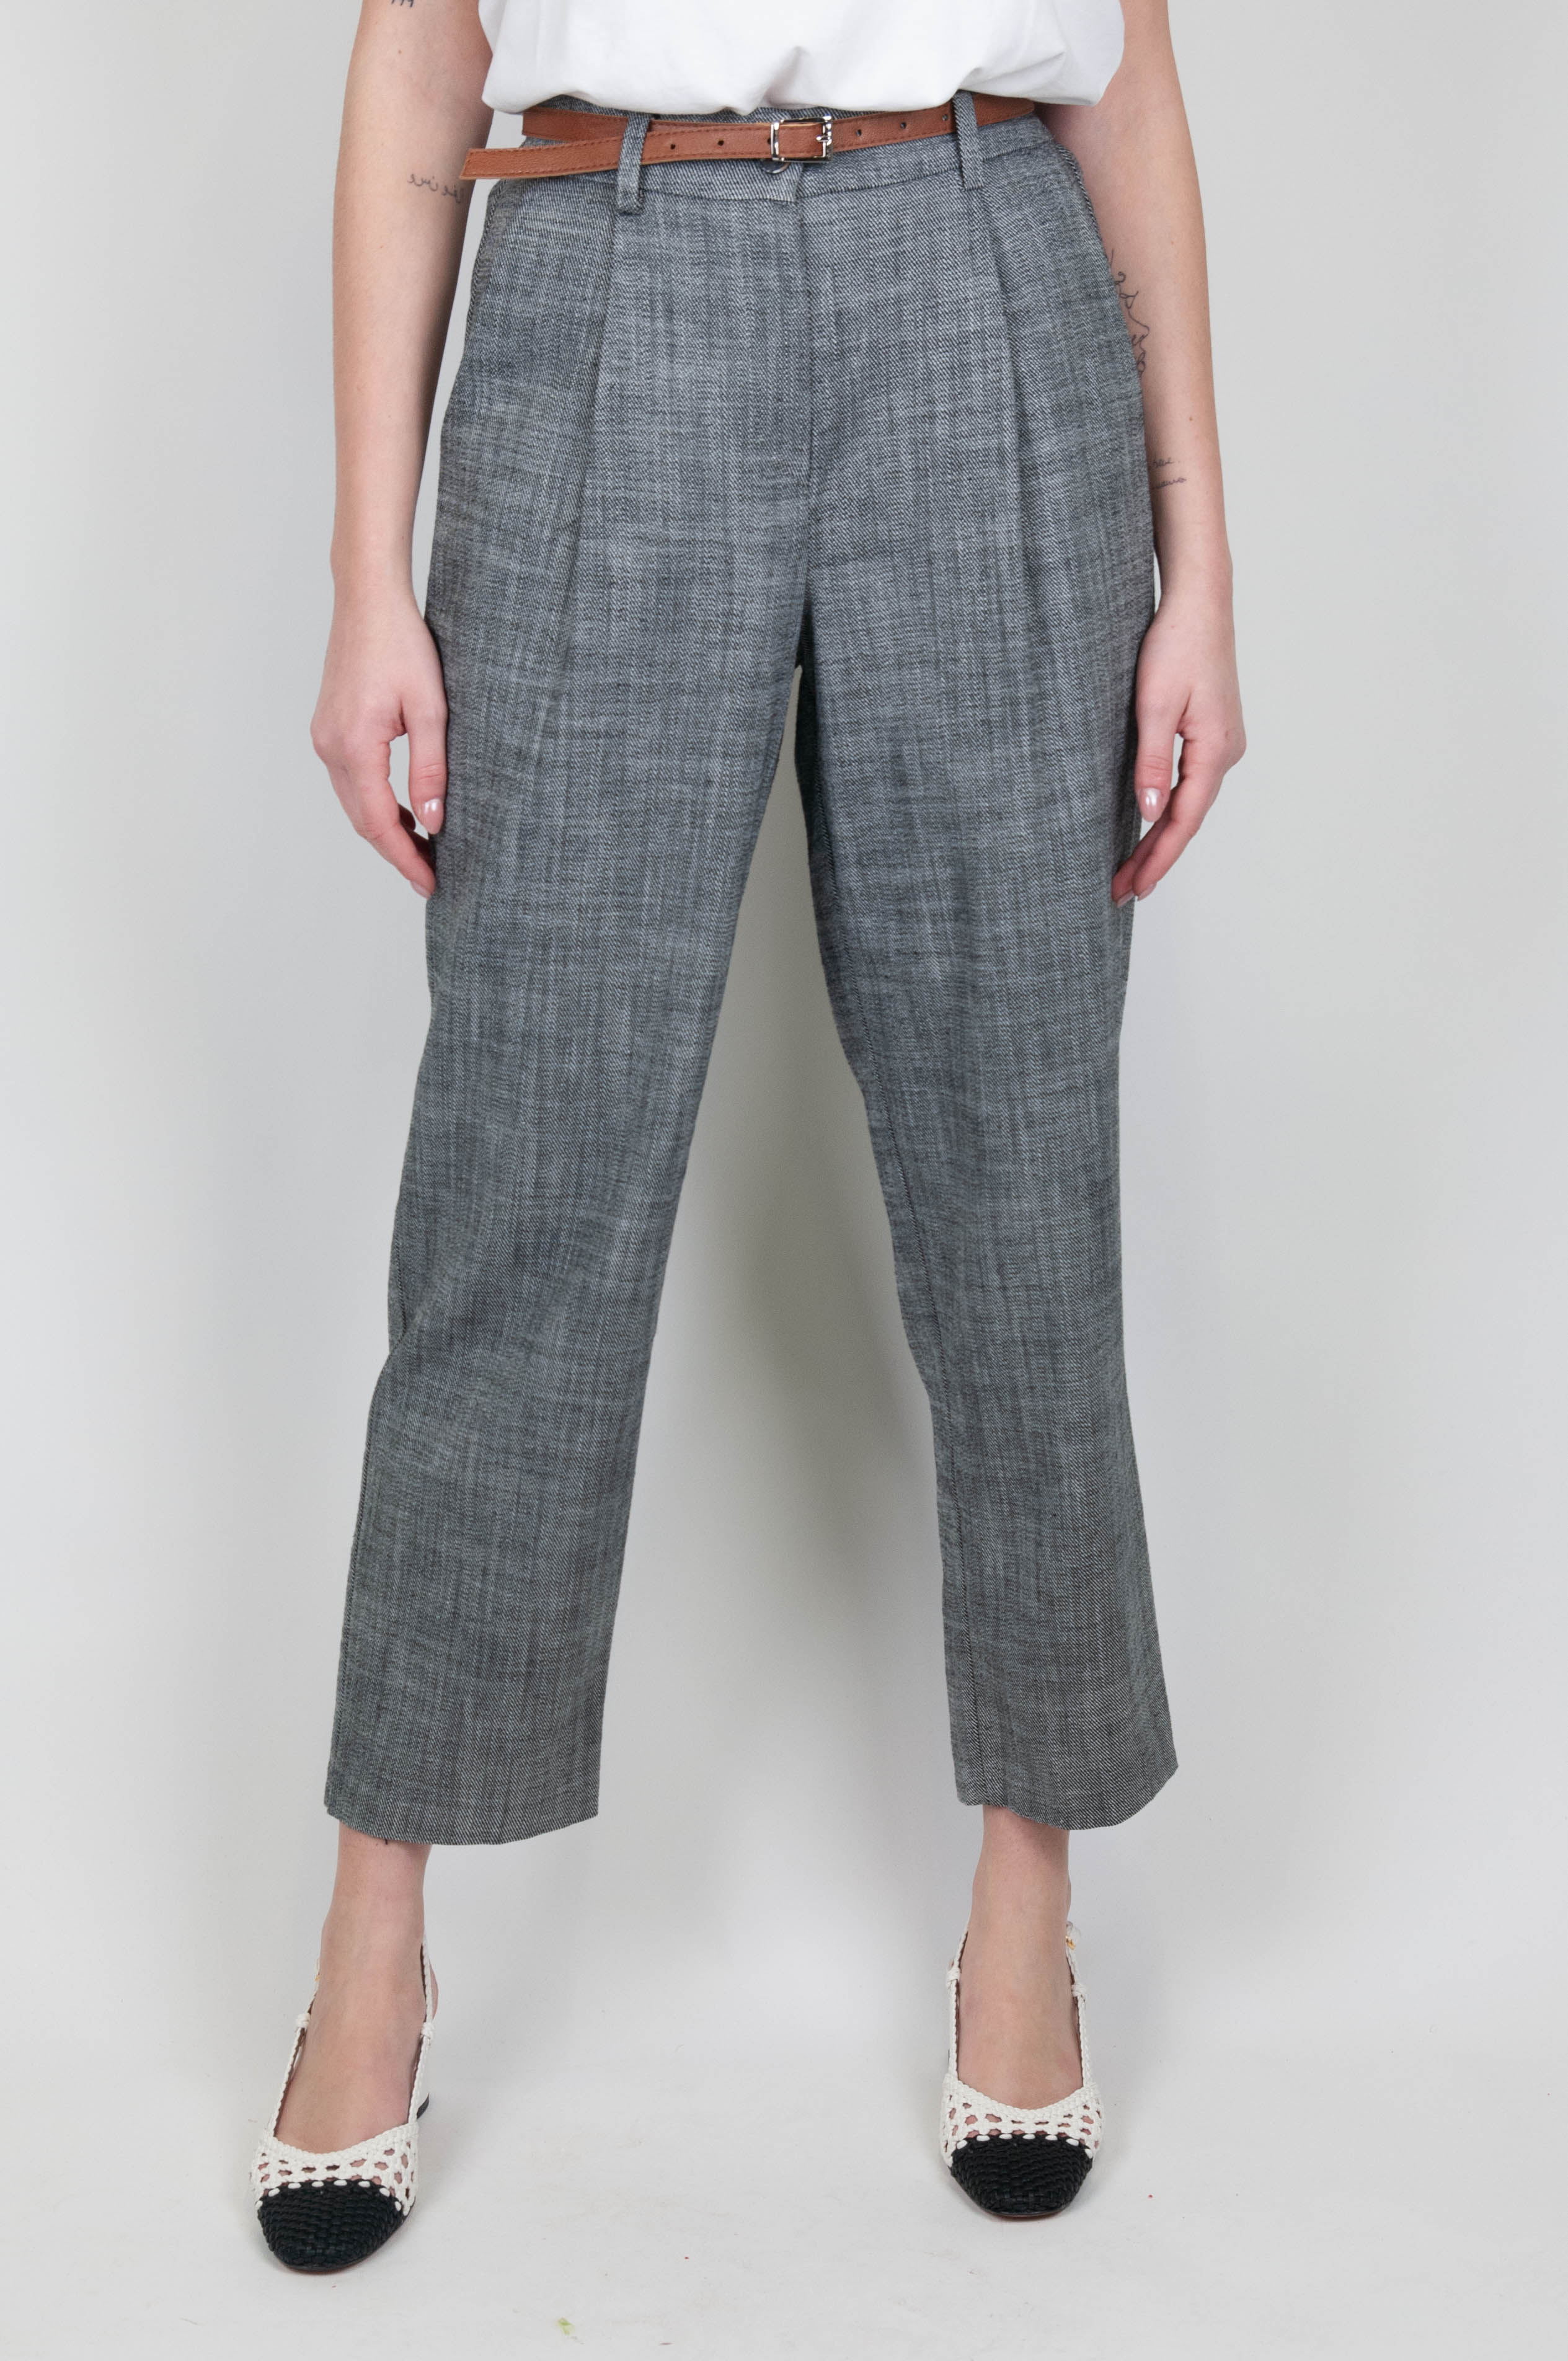 Tension in - Denim trousers with pleats